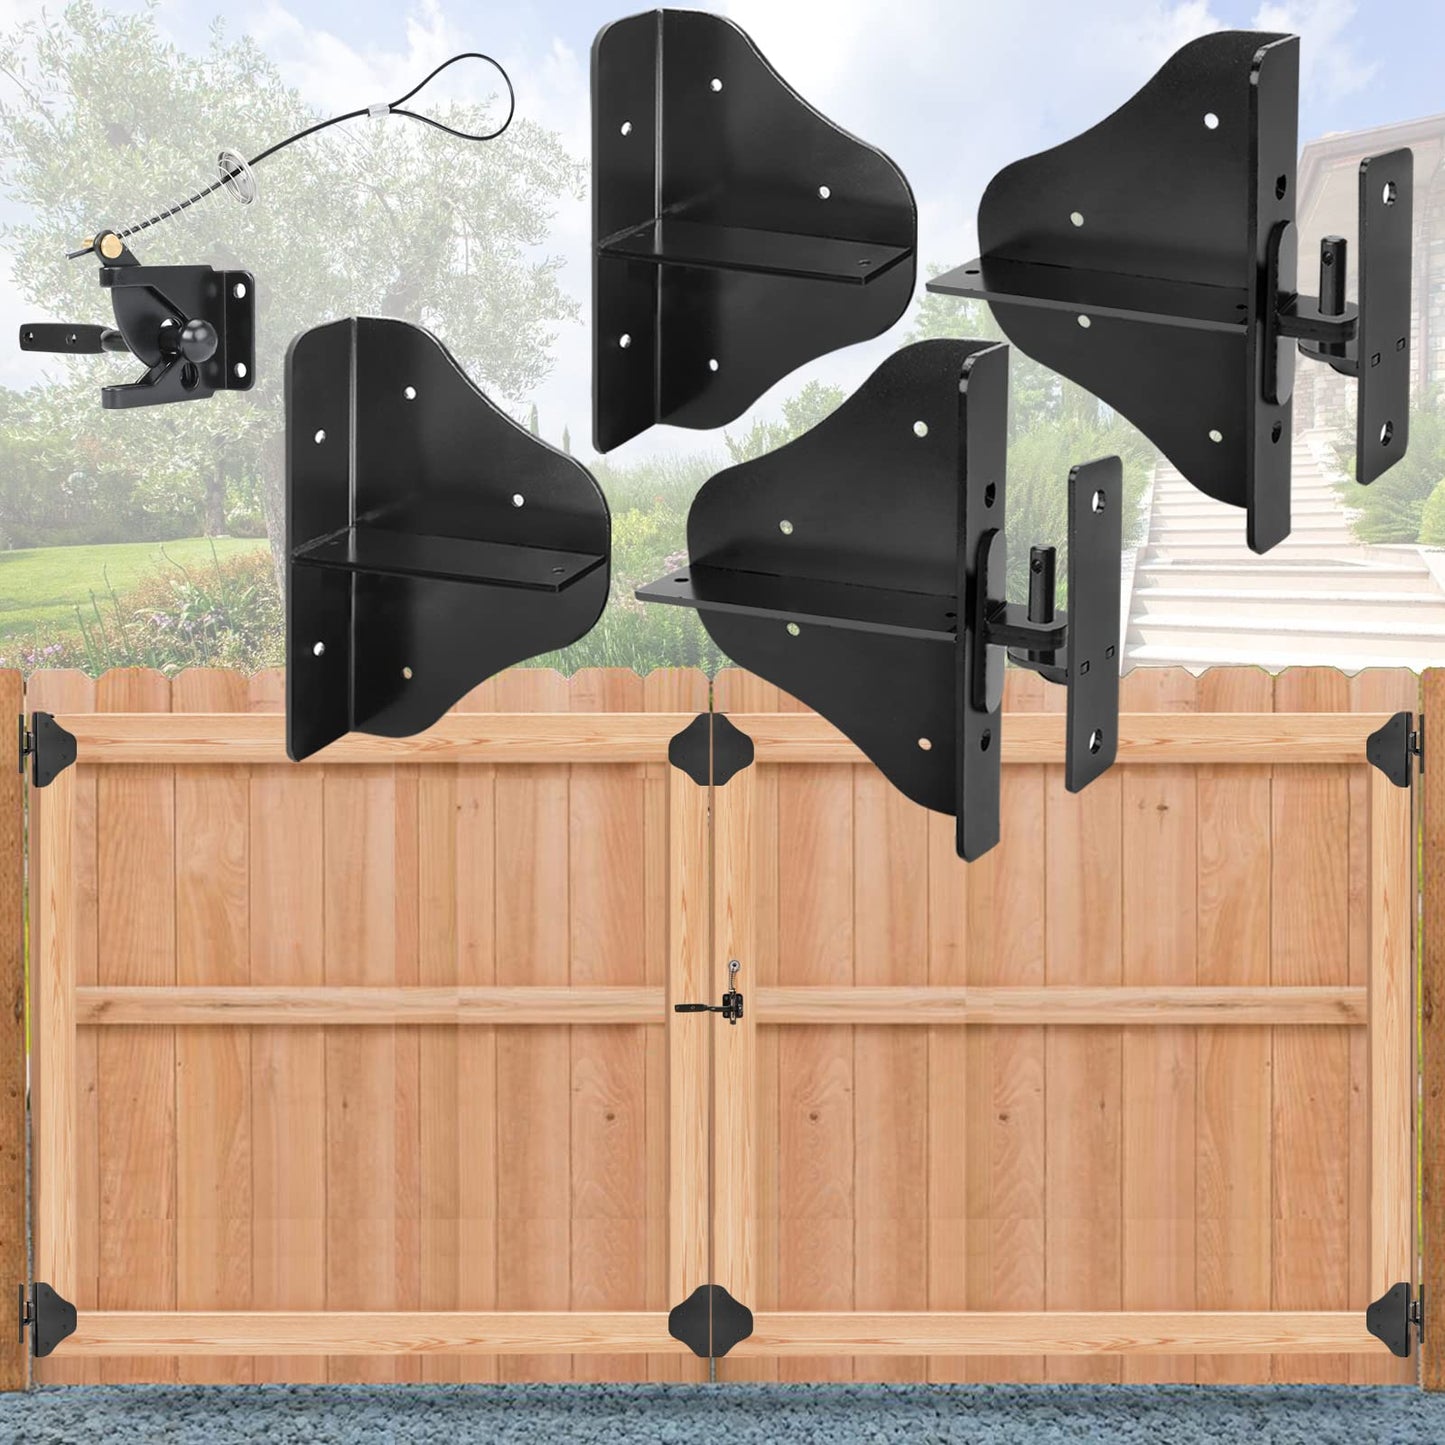 Magacyo Fence Gate Kit Gate Hardware with Gate Latch for Single and Double Doors - Updated 90 Degree Right Angle Gate Hinges - Anti Sag Gate Kit -